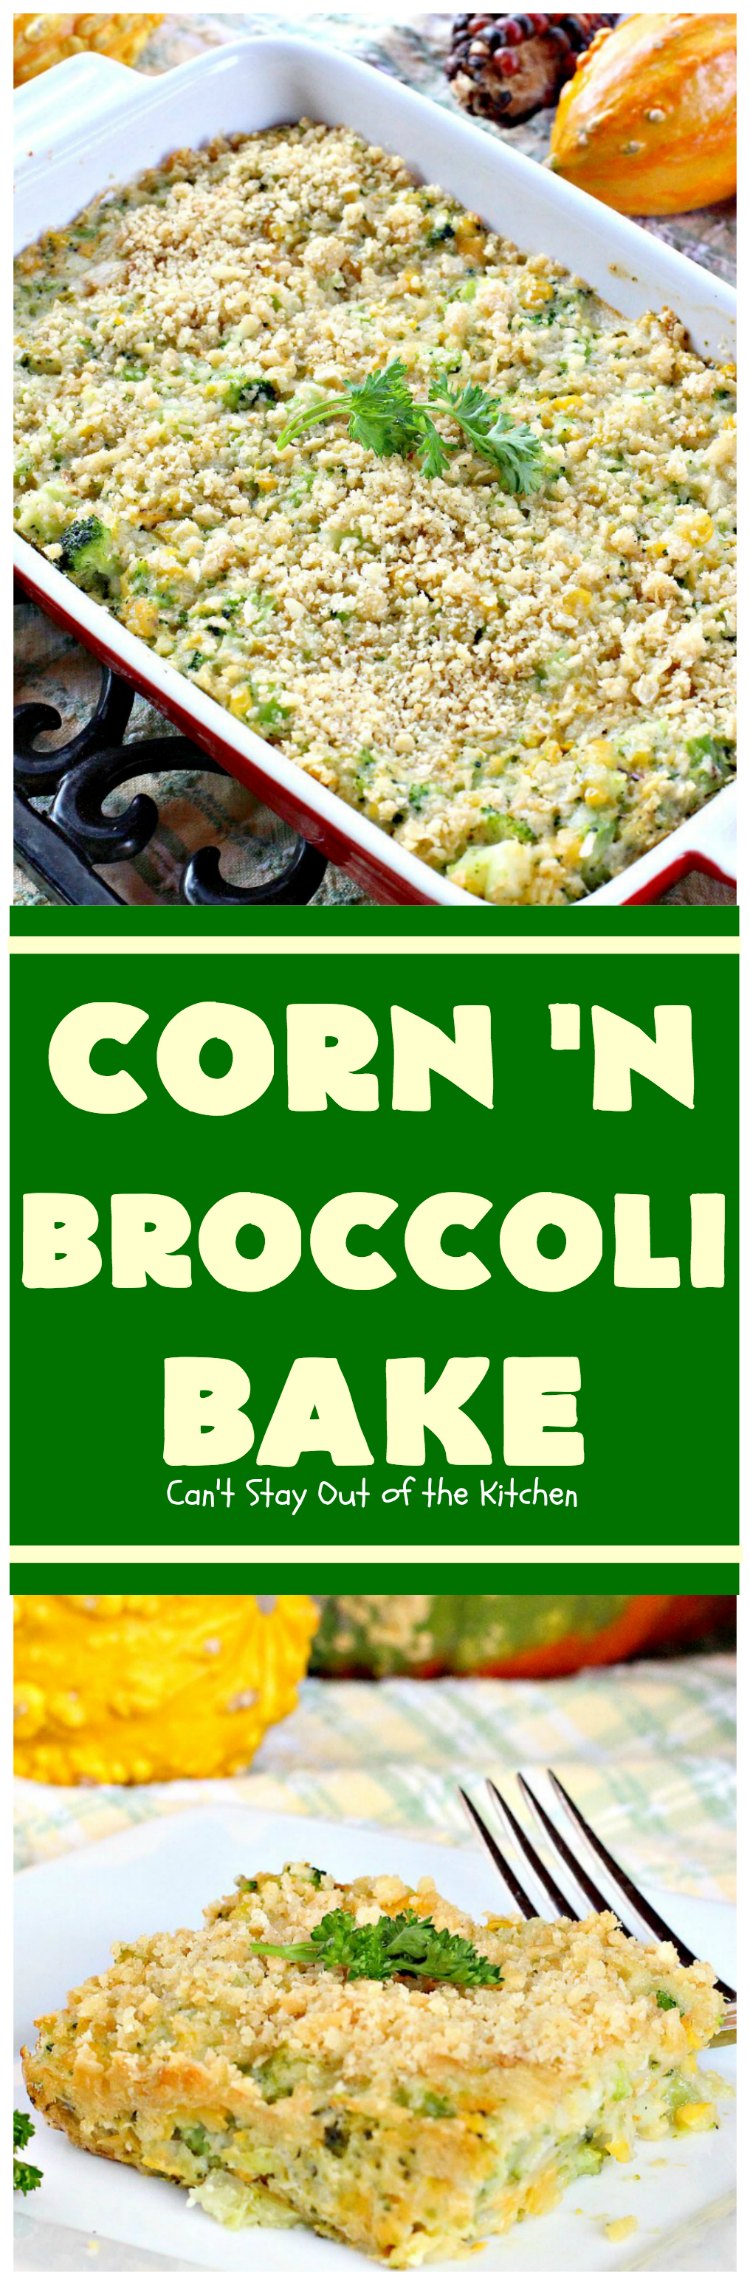 Corn 'n Broccoli Bake | Can't Stay Out of the Kitchen